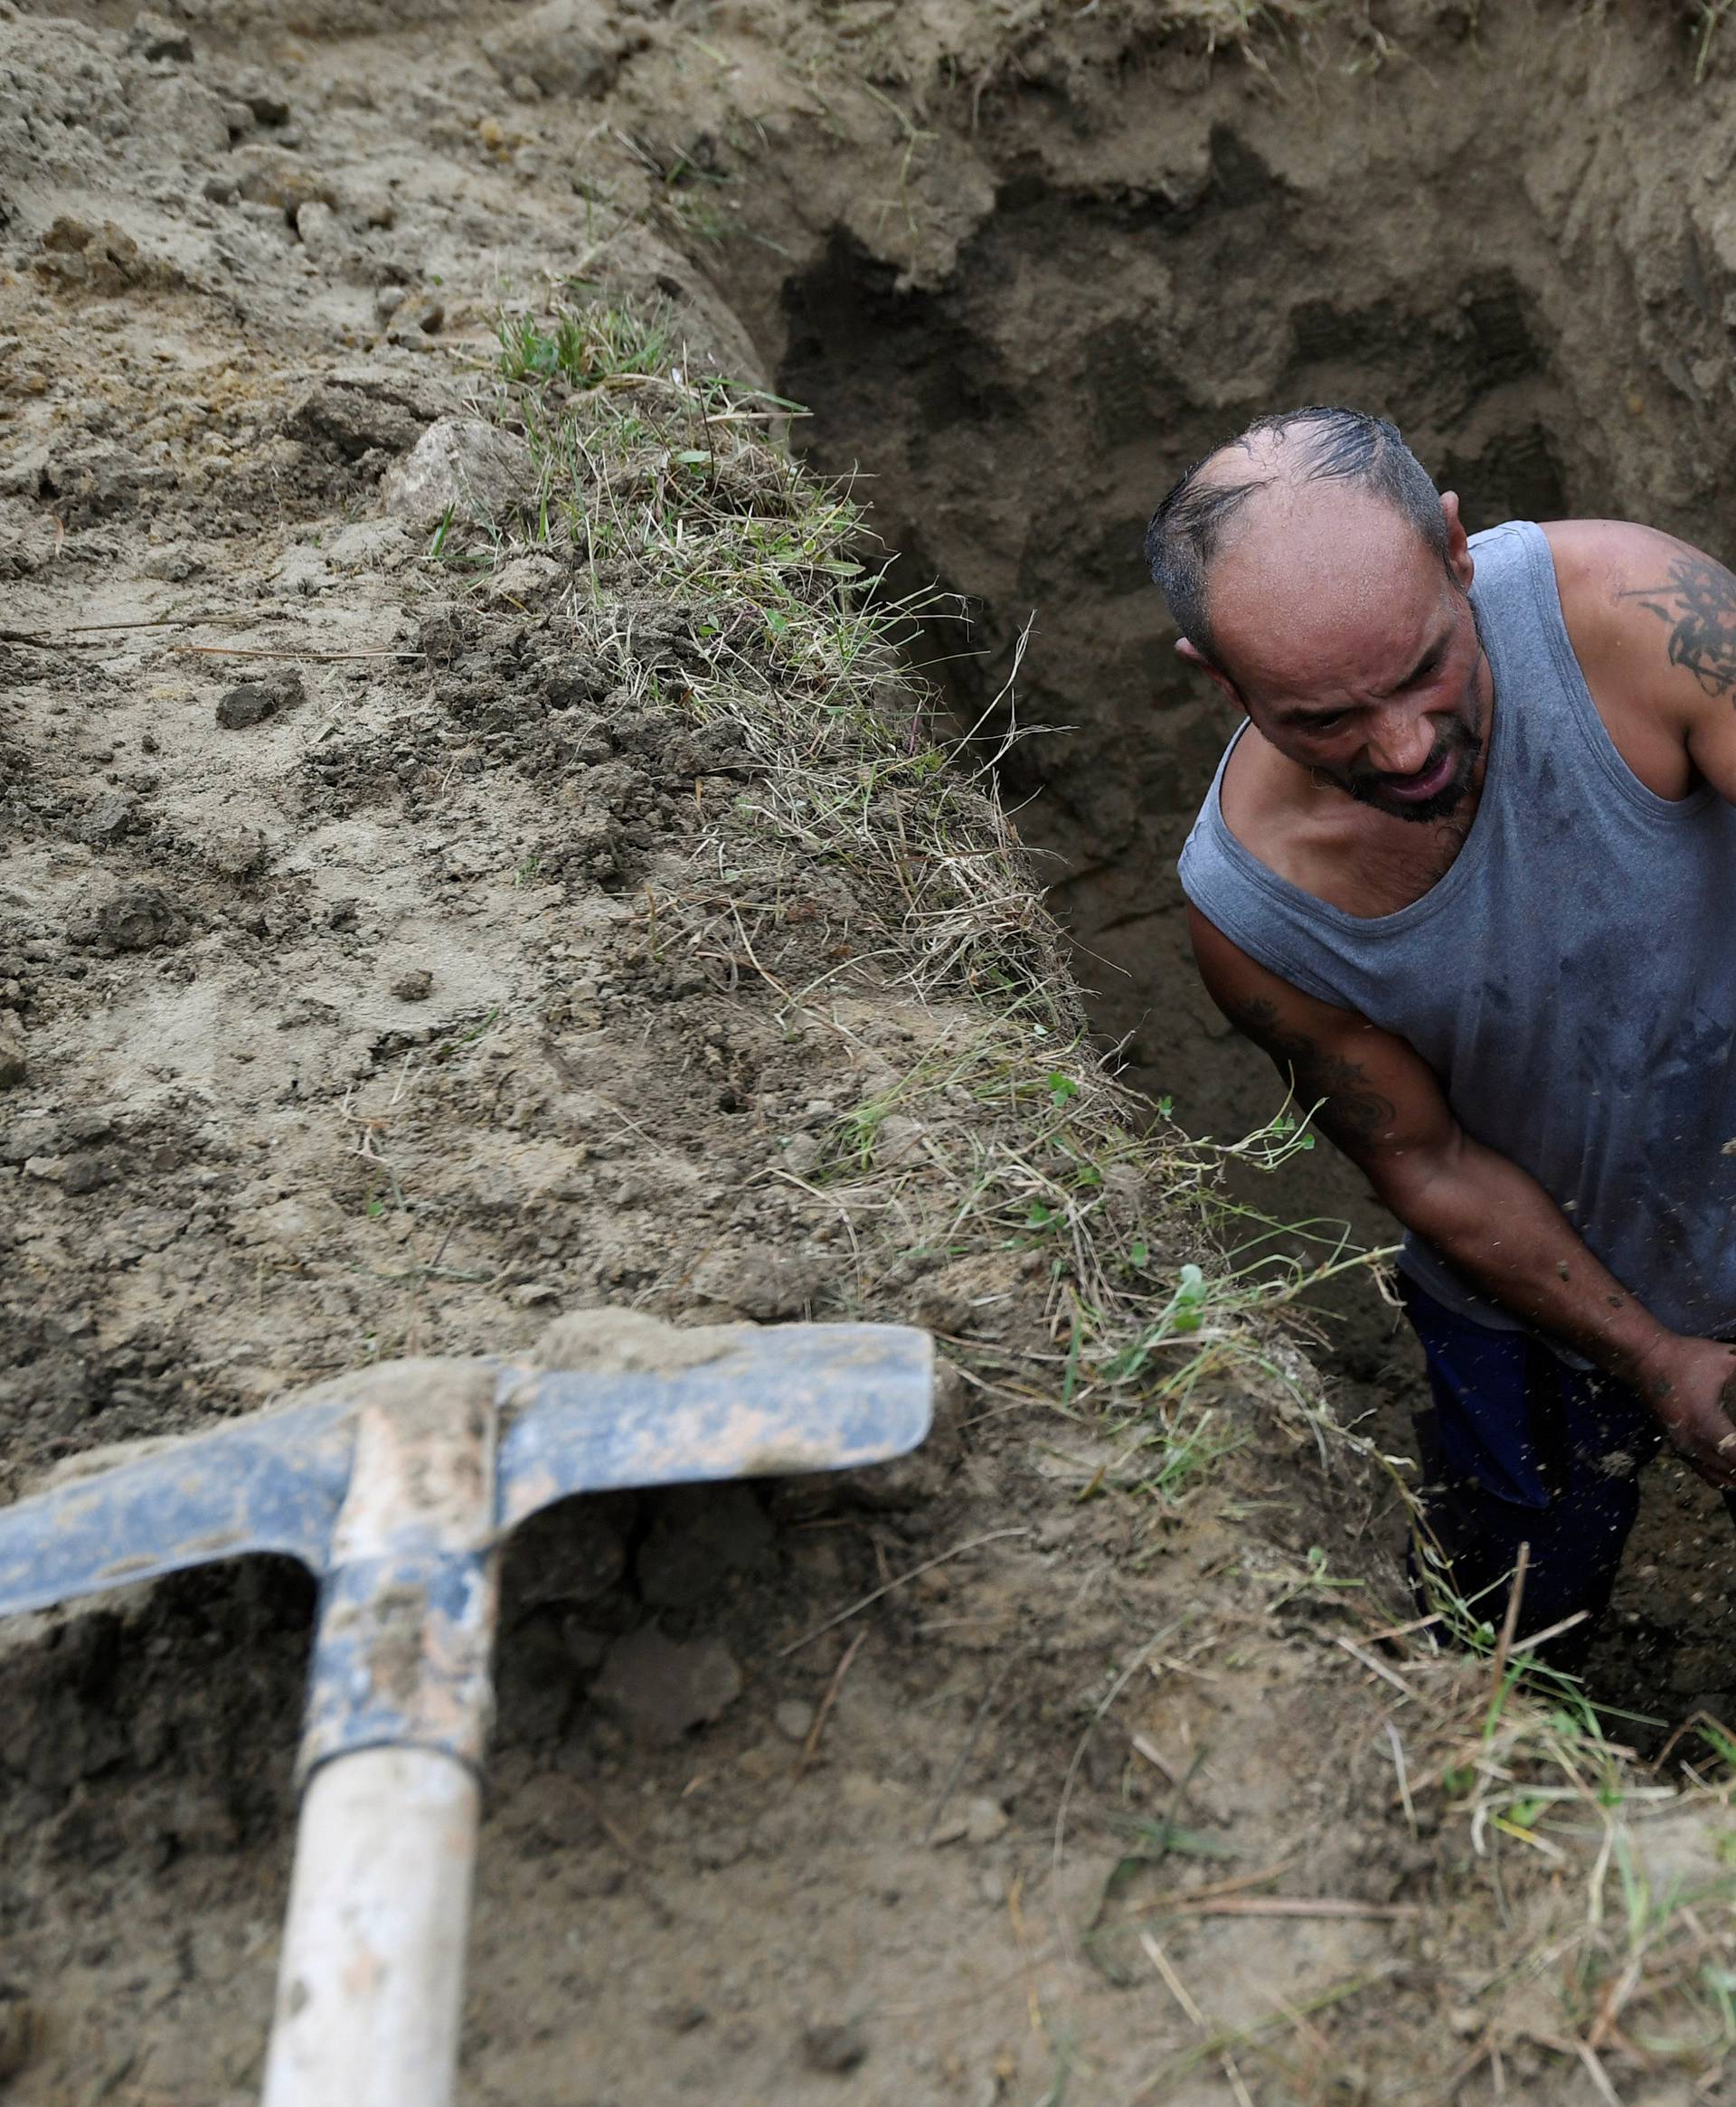 A gravedigger competes in a grave digging championship in Trencin, Slovakia